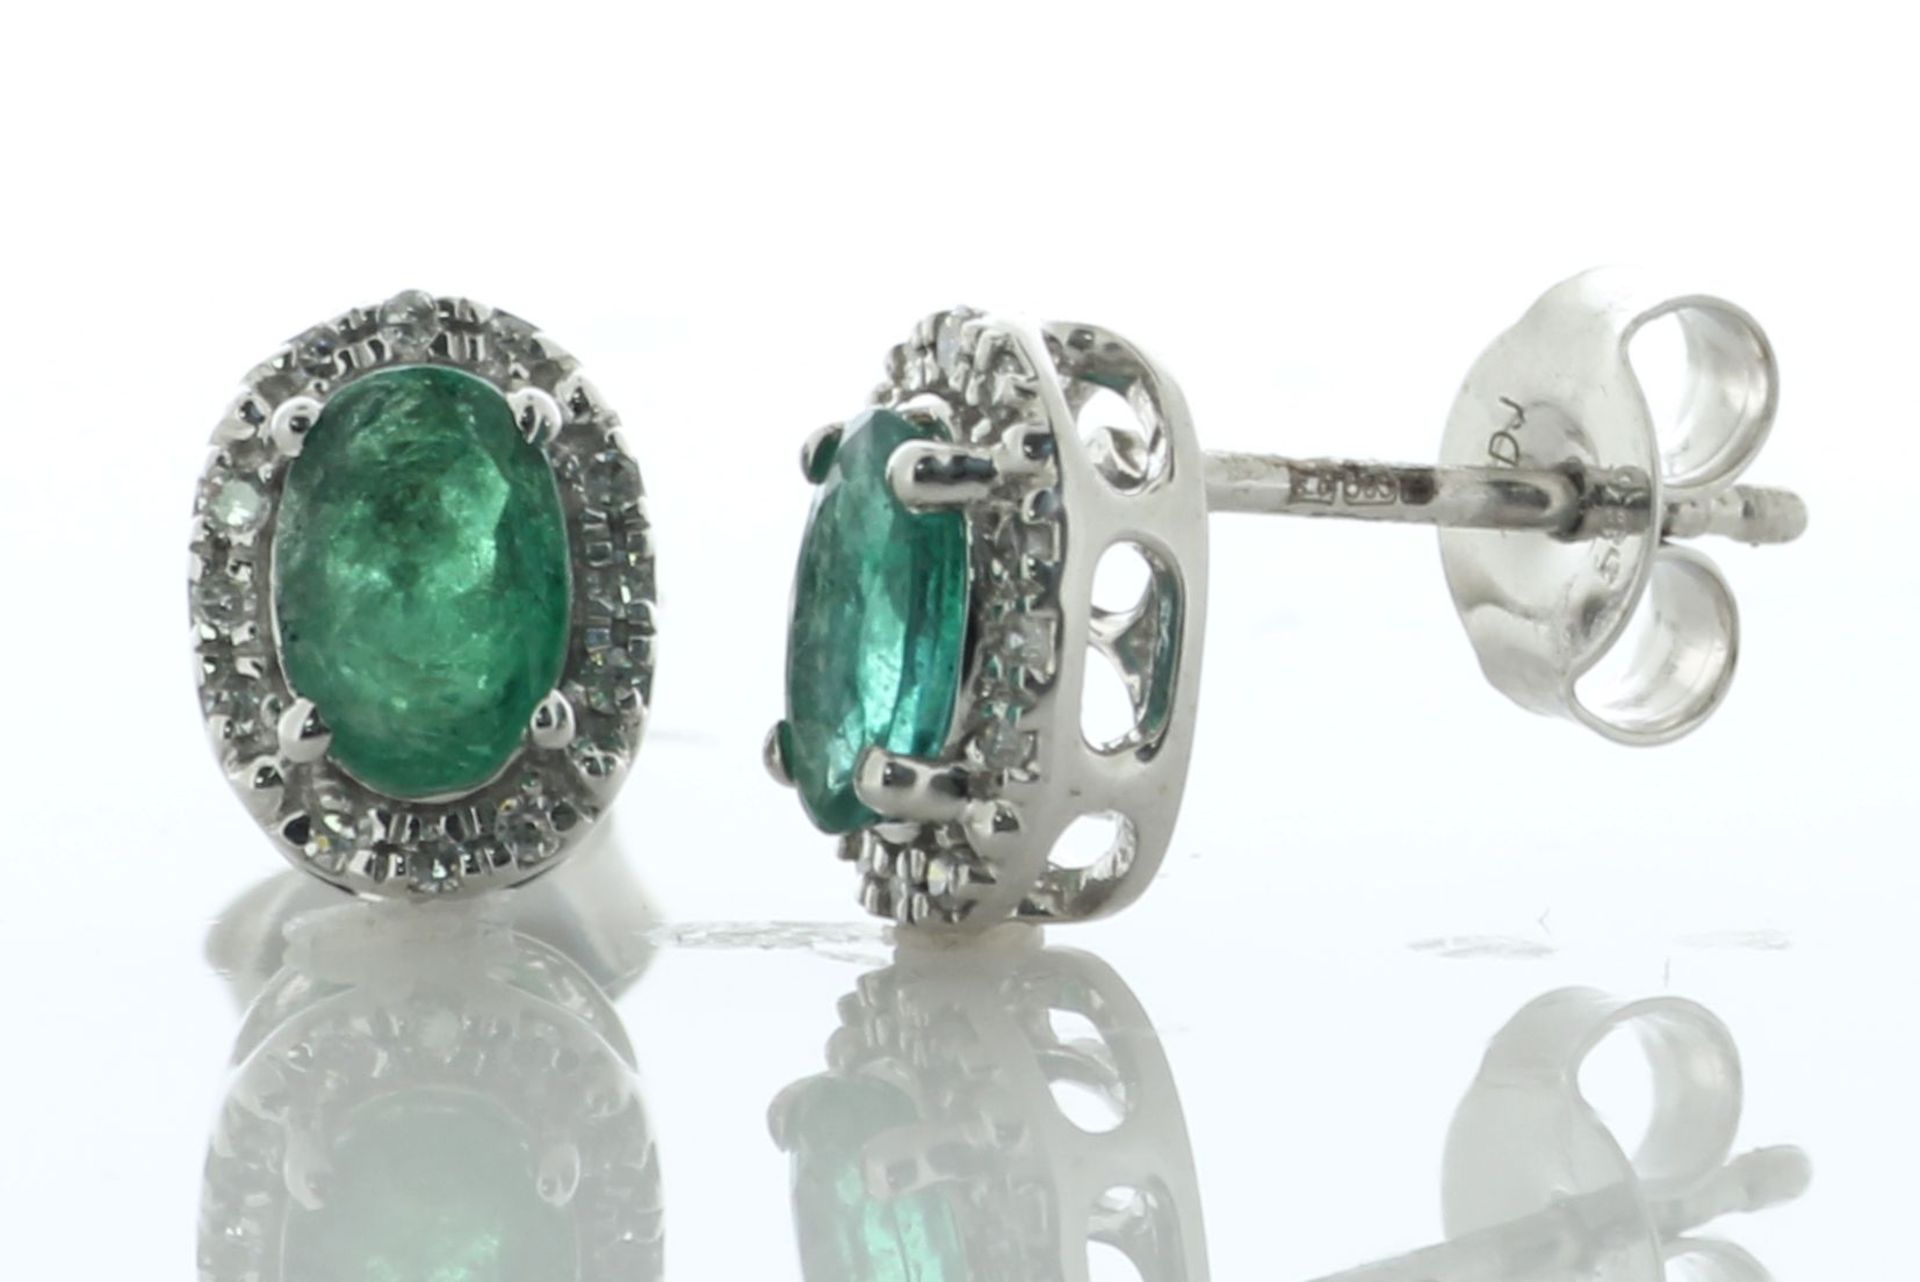 14ct White Gold Oval Cut Emerald And Diamond Stud Earring 0.10 Carats - Valued By IDI £2,225.00 -